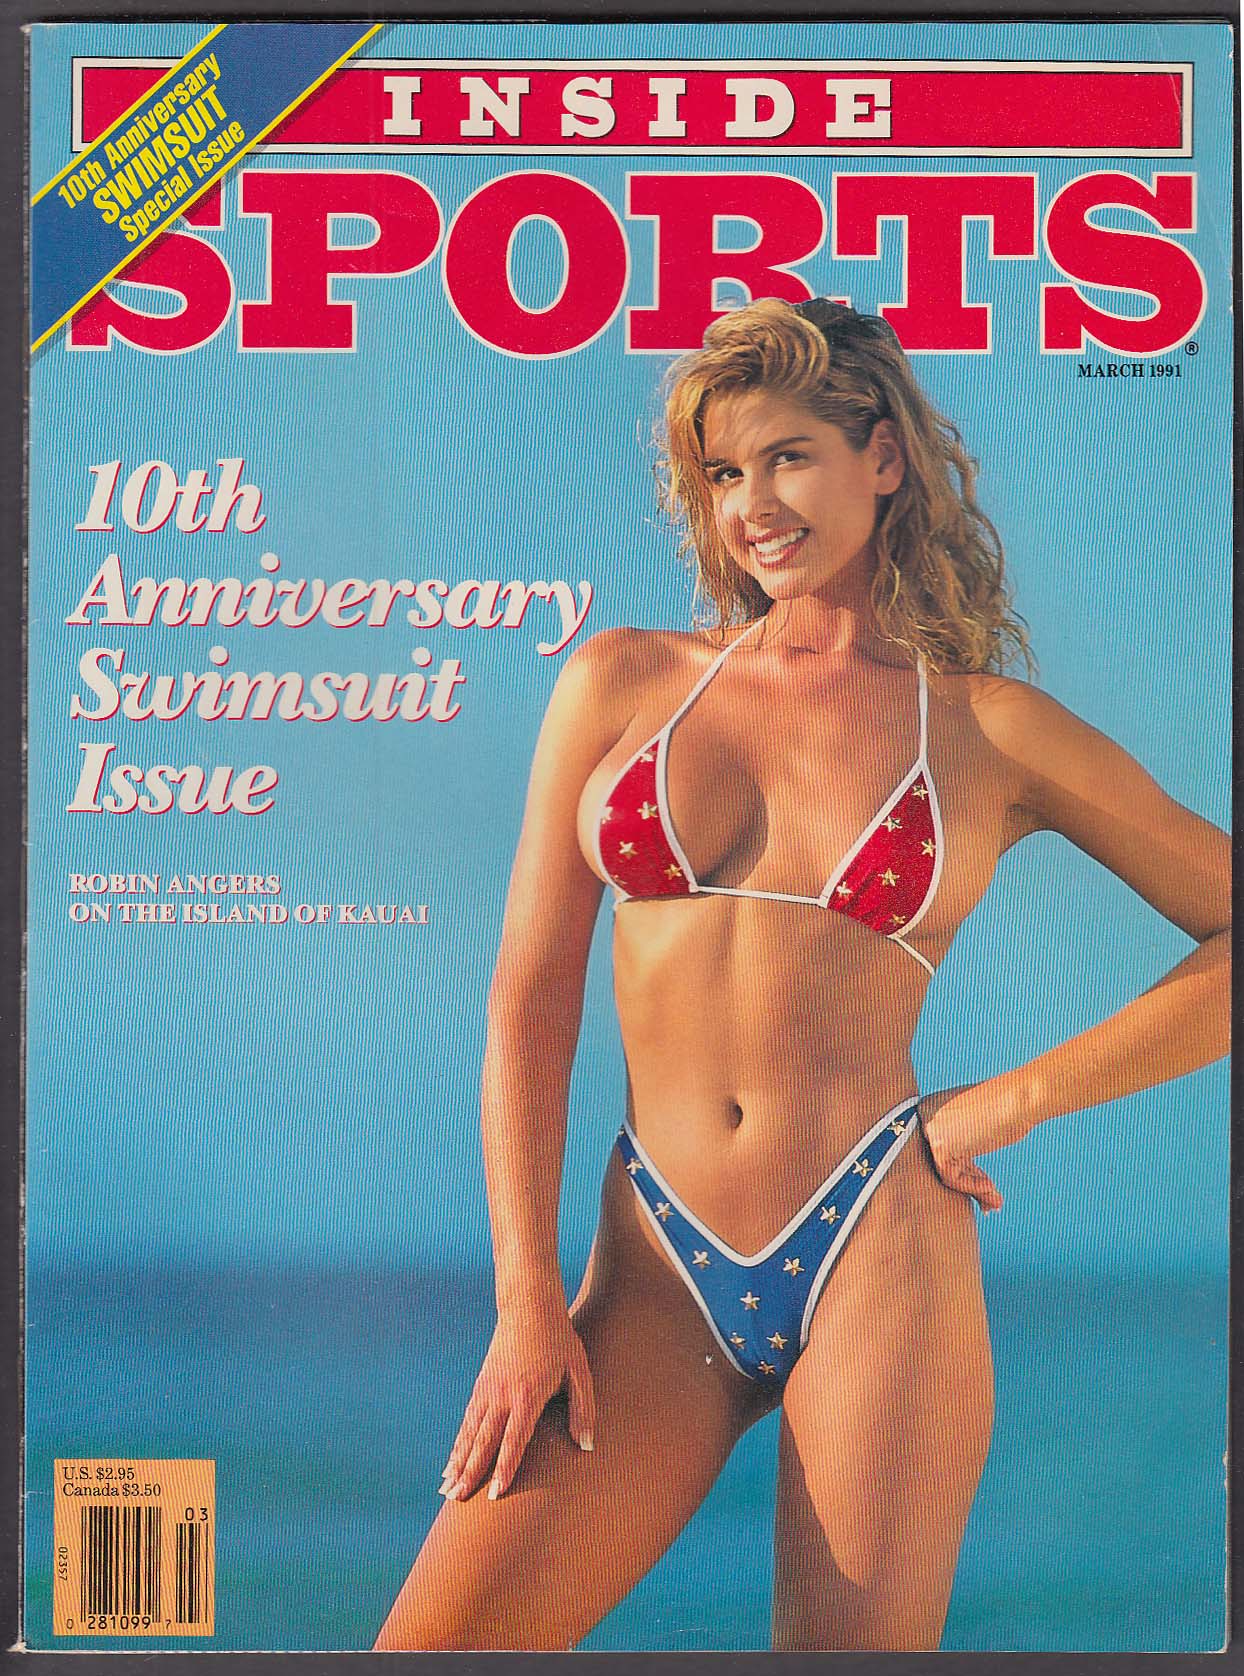 INSIDE SPORTS 10th Anniversary Swimsuit Issue Robin Angers E